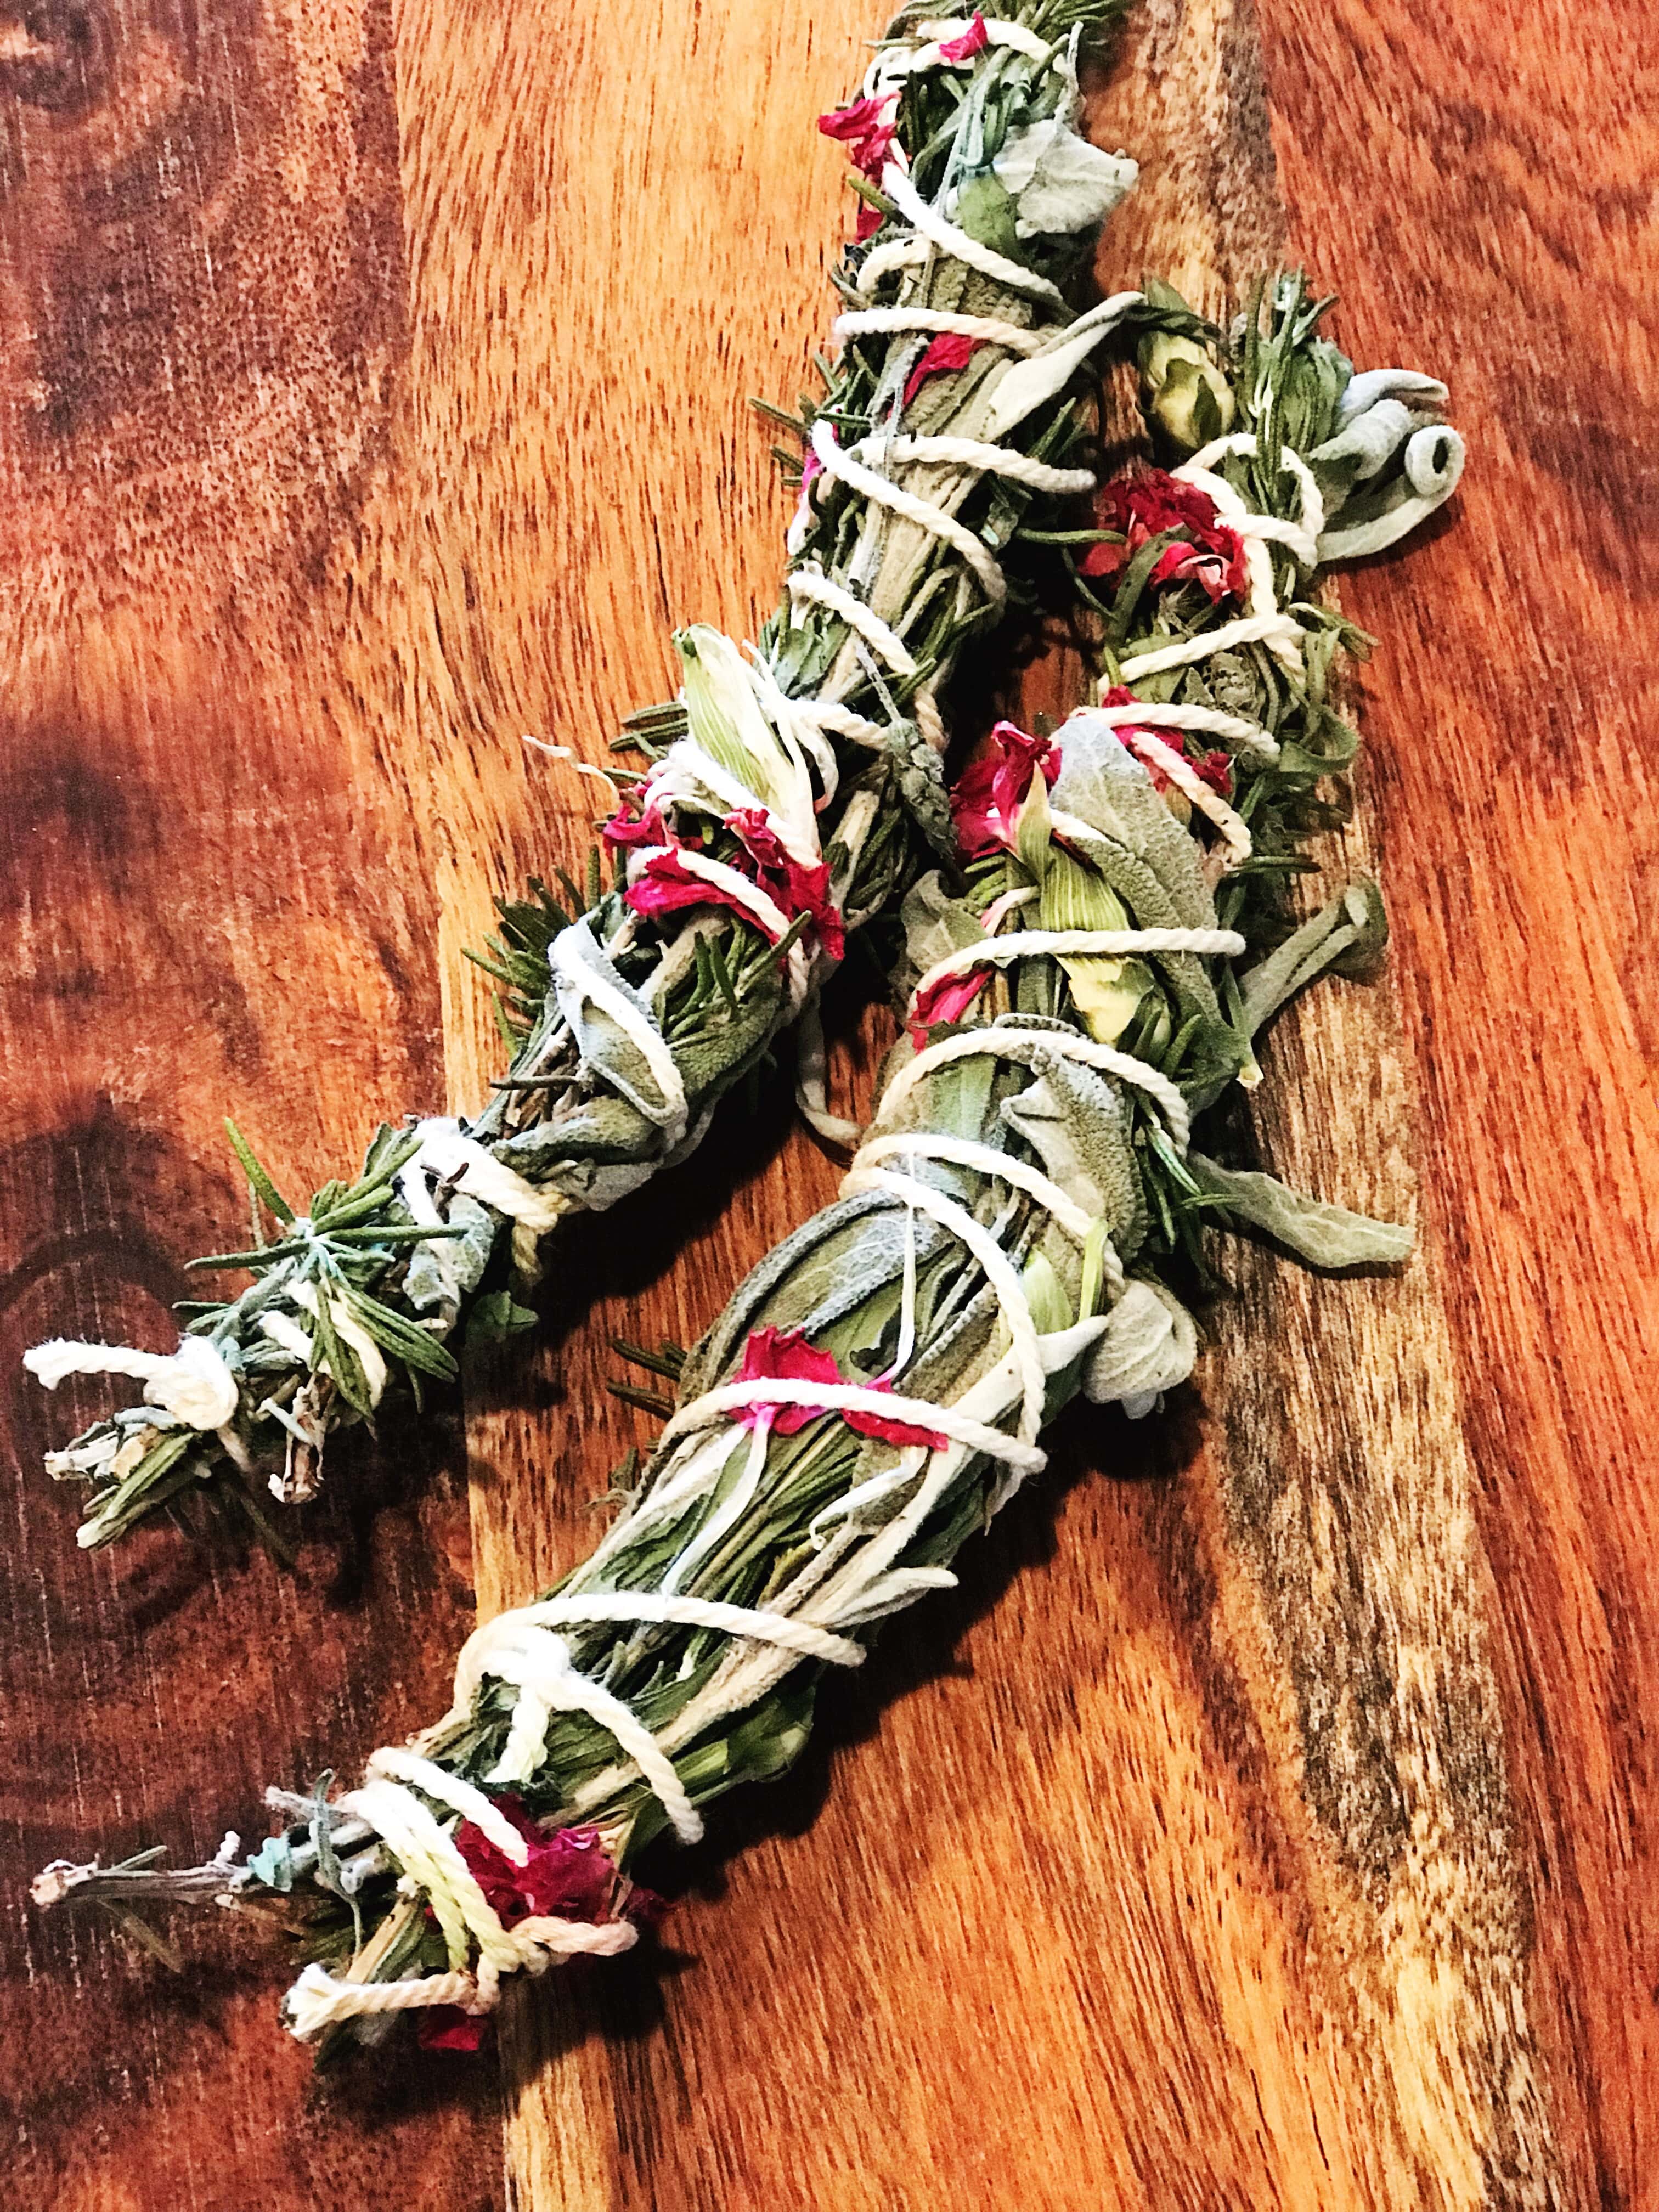 DIY dried herb and bloom smudge stick